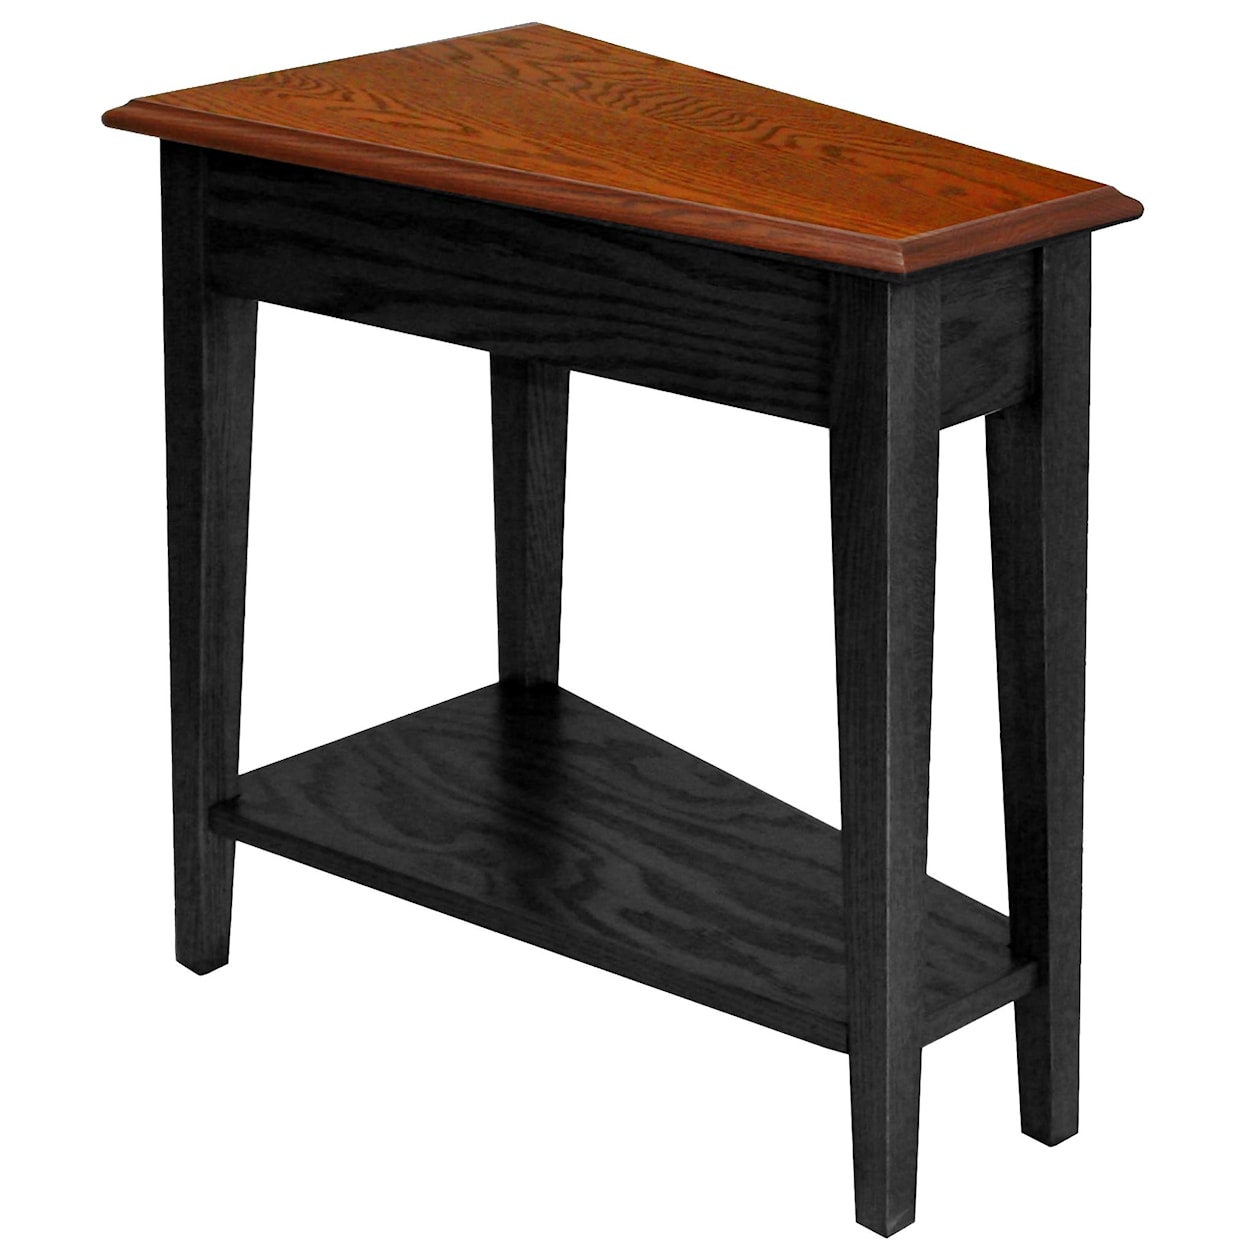 Leick Furniture Favorite Finds Recliner Wedge Table